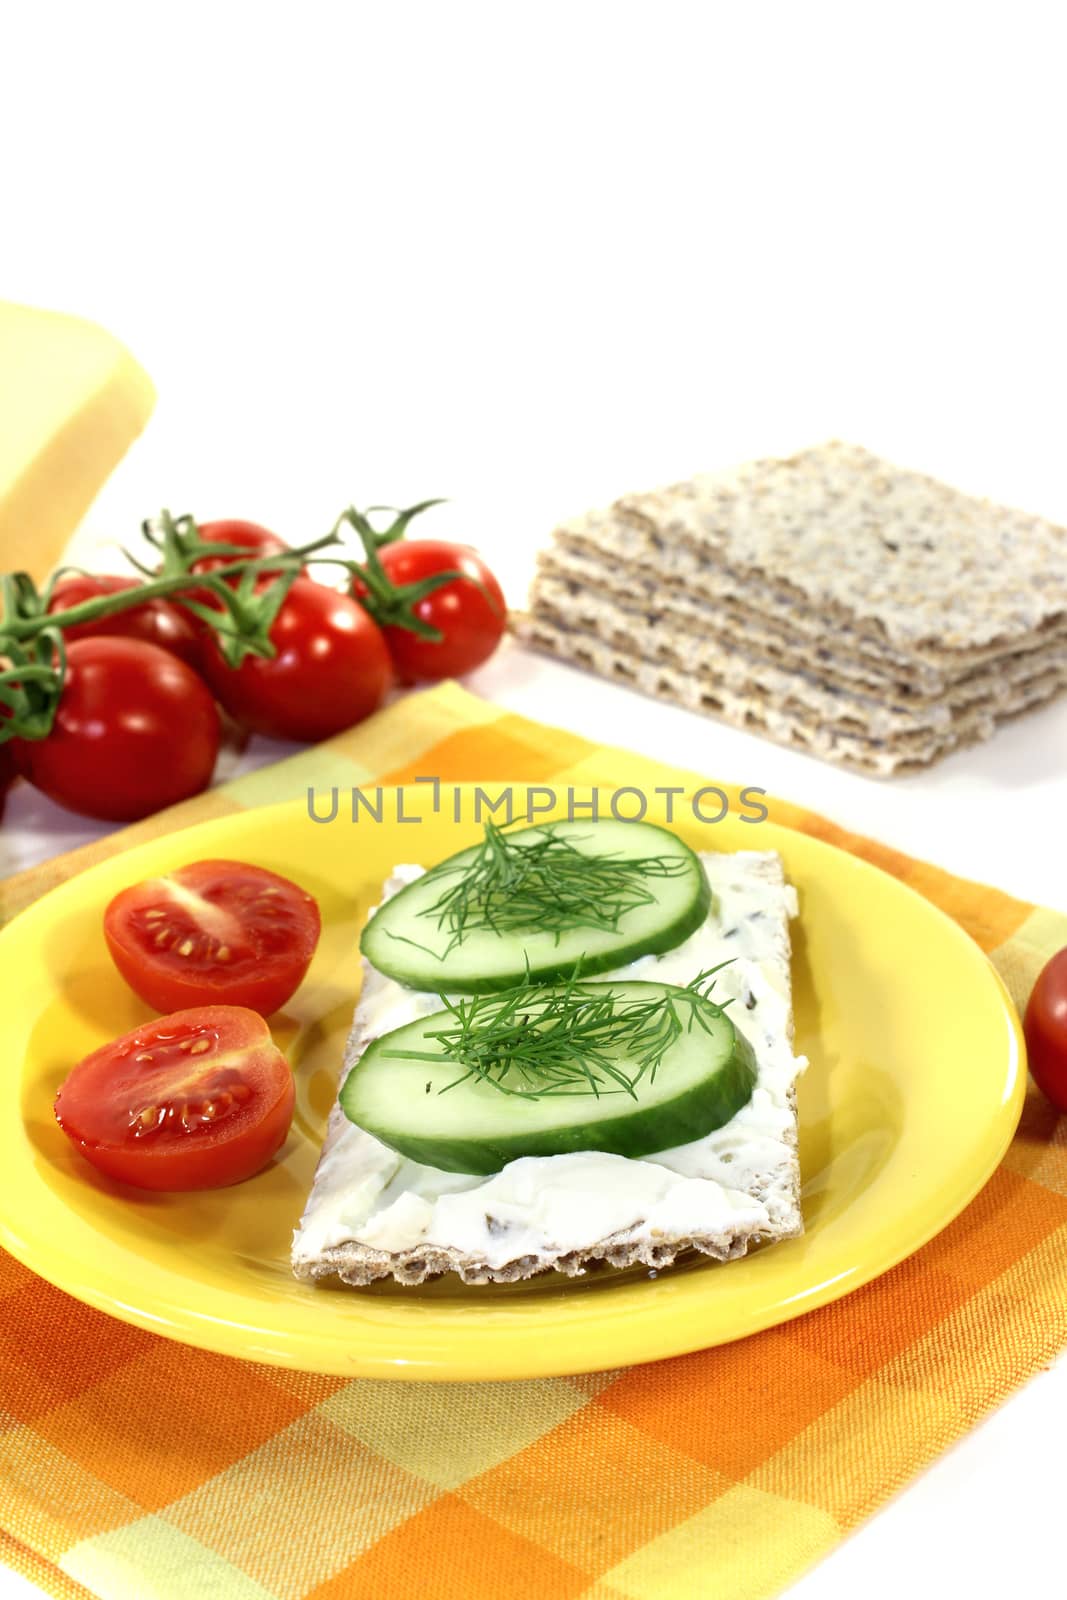 Crispbread with cream cheese and tomatoes by discovery